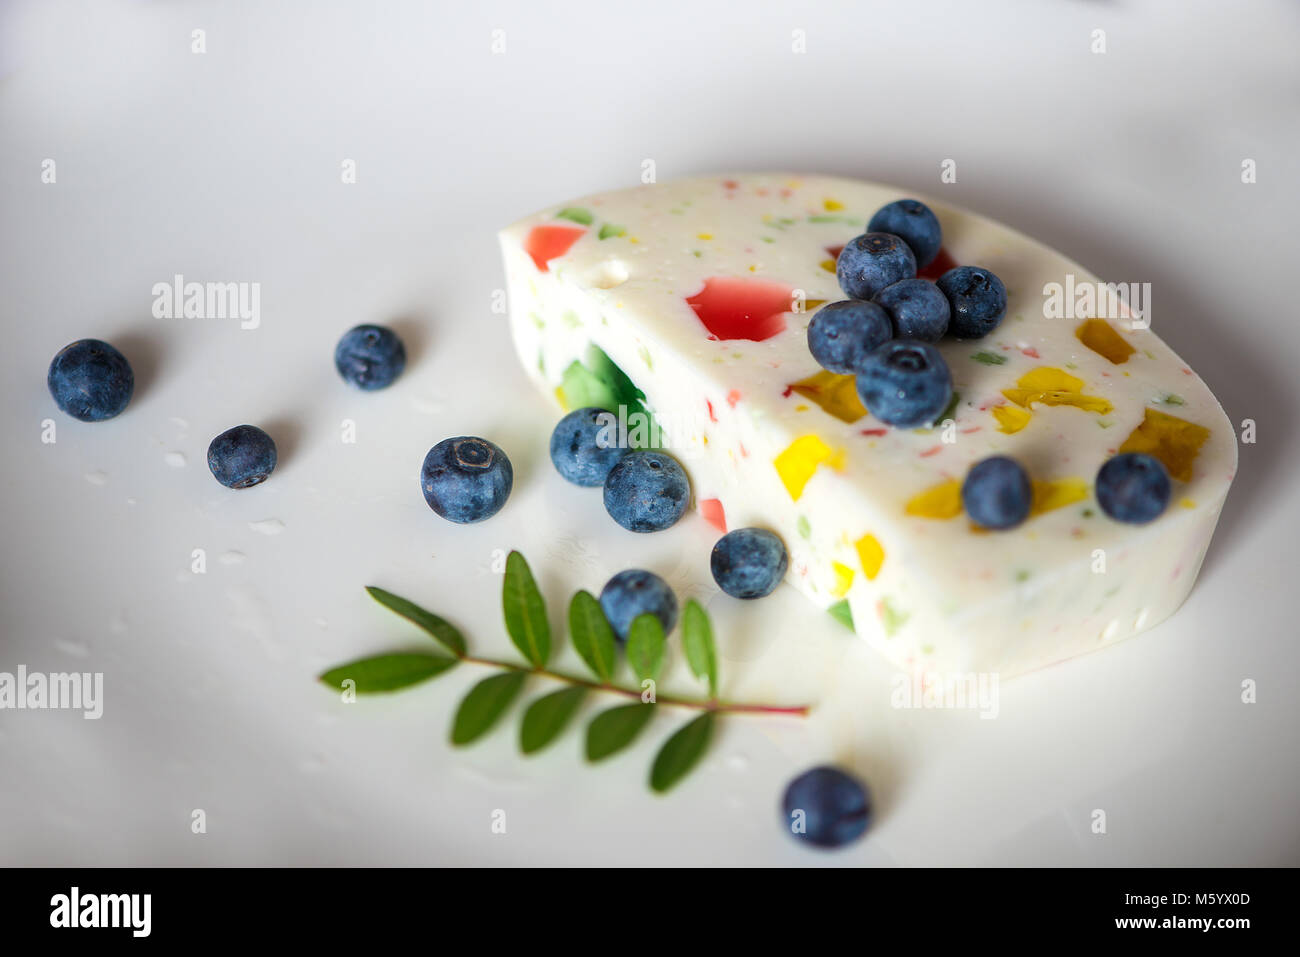 Dessert - Cheesecake  with colorful jelly and blackberries on white background Stock Photo